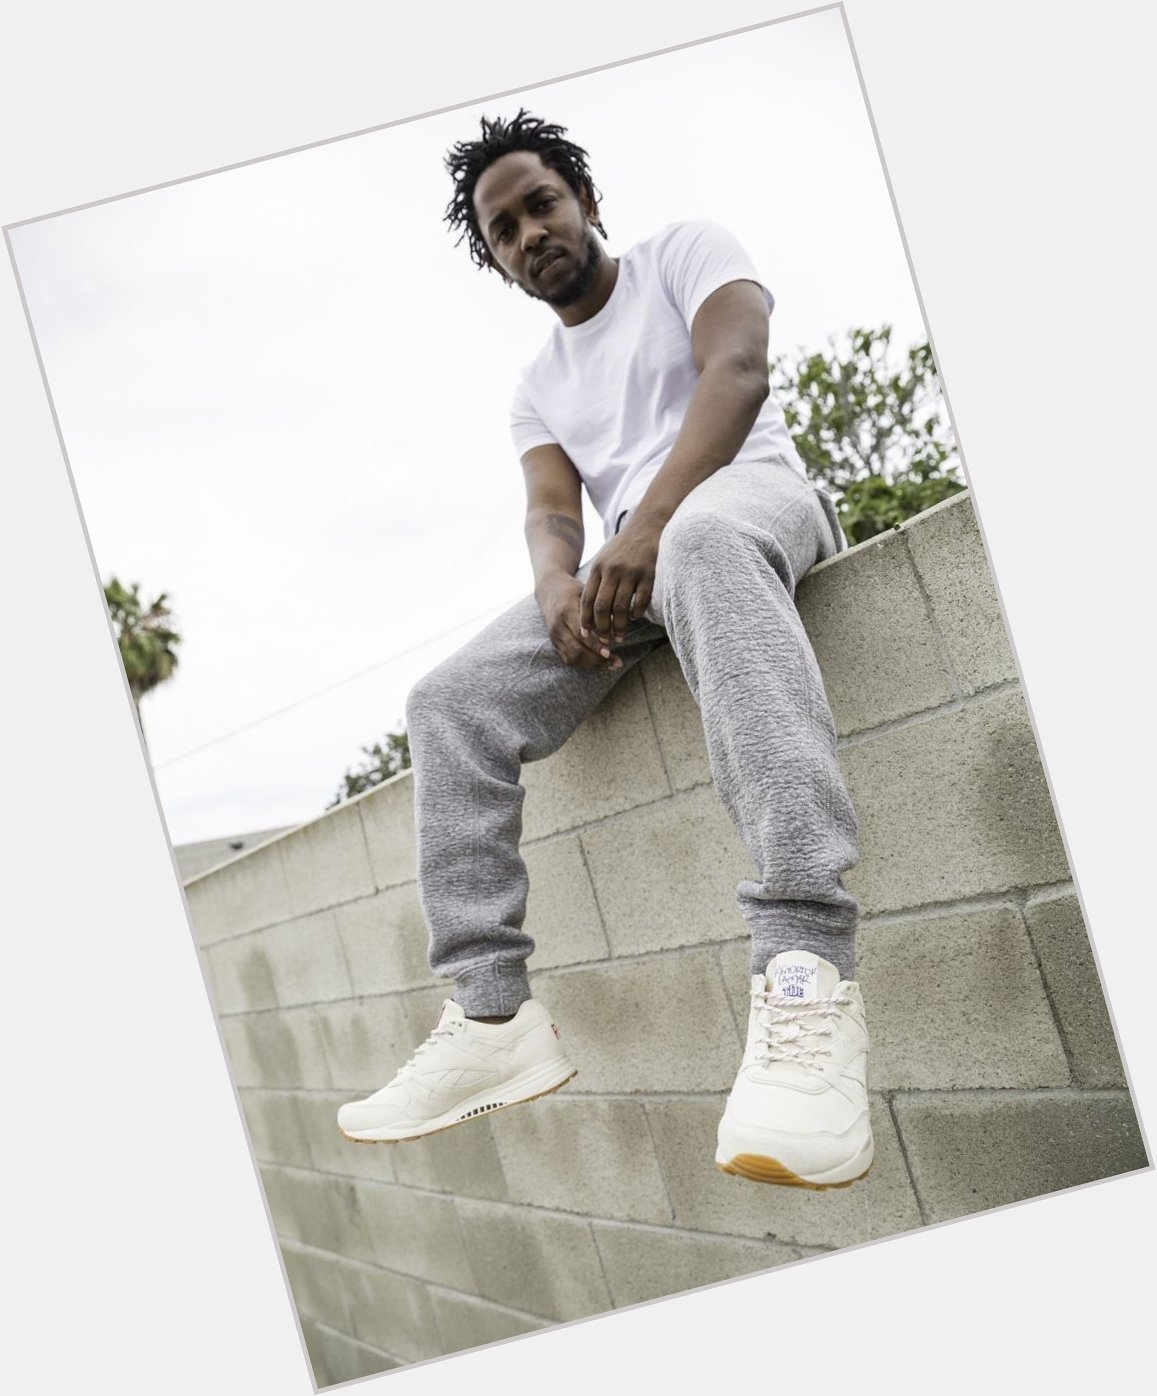 Happy birthday to the best rapper on the planet, KENDRICK LAMAR! 